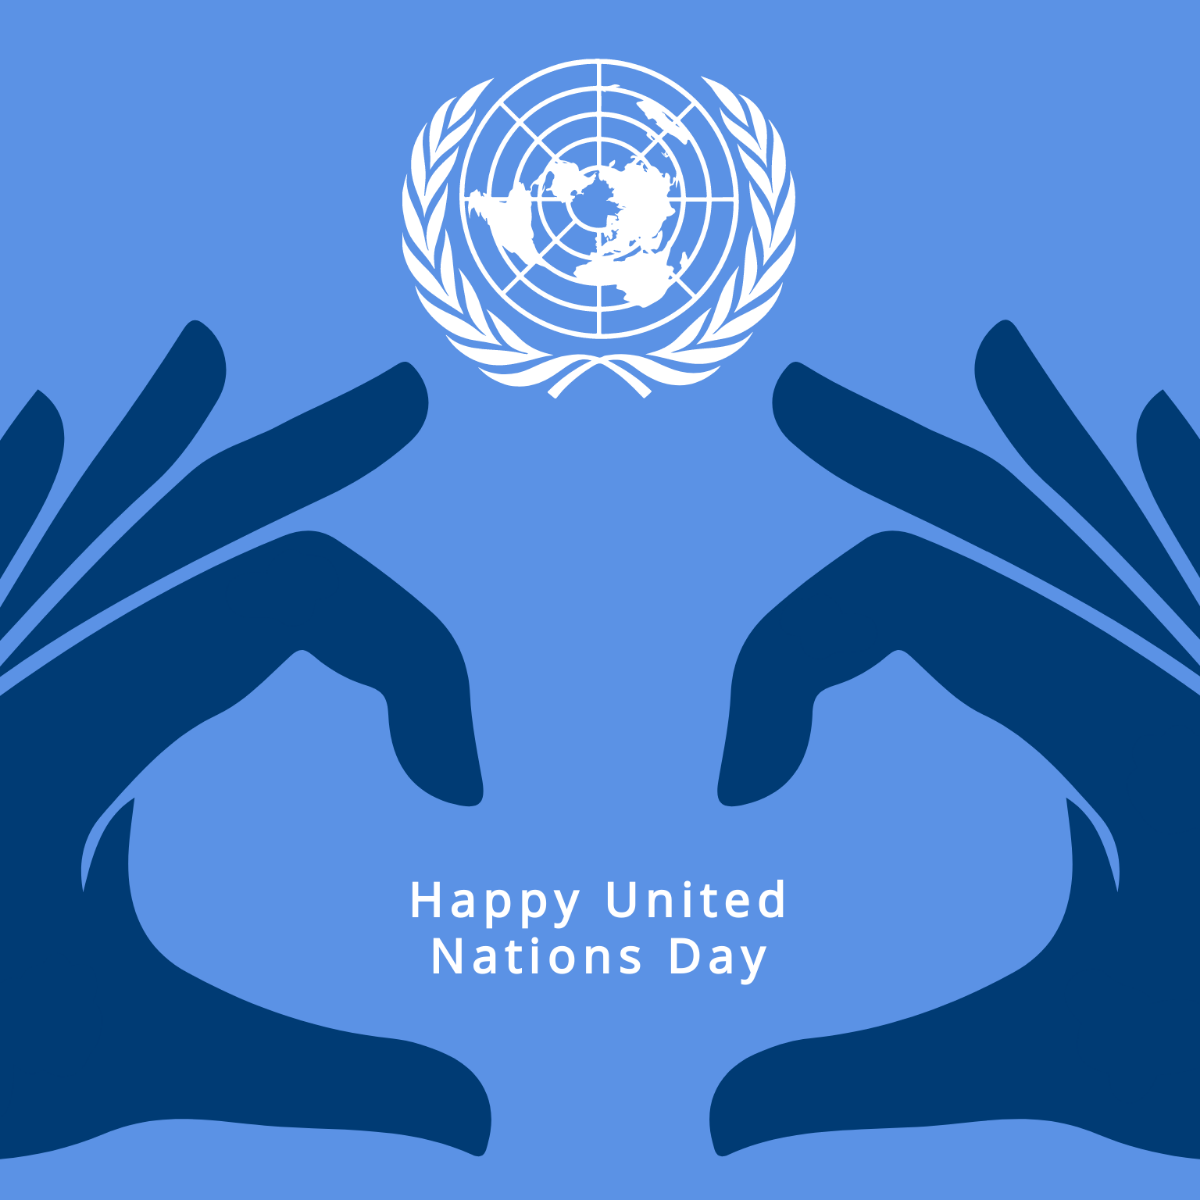 Happy United Nations Day Vector